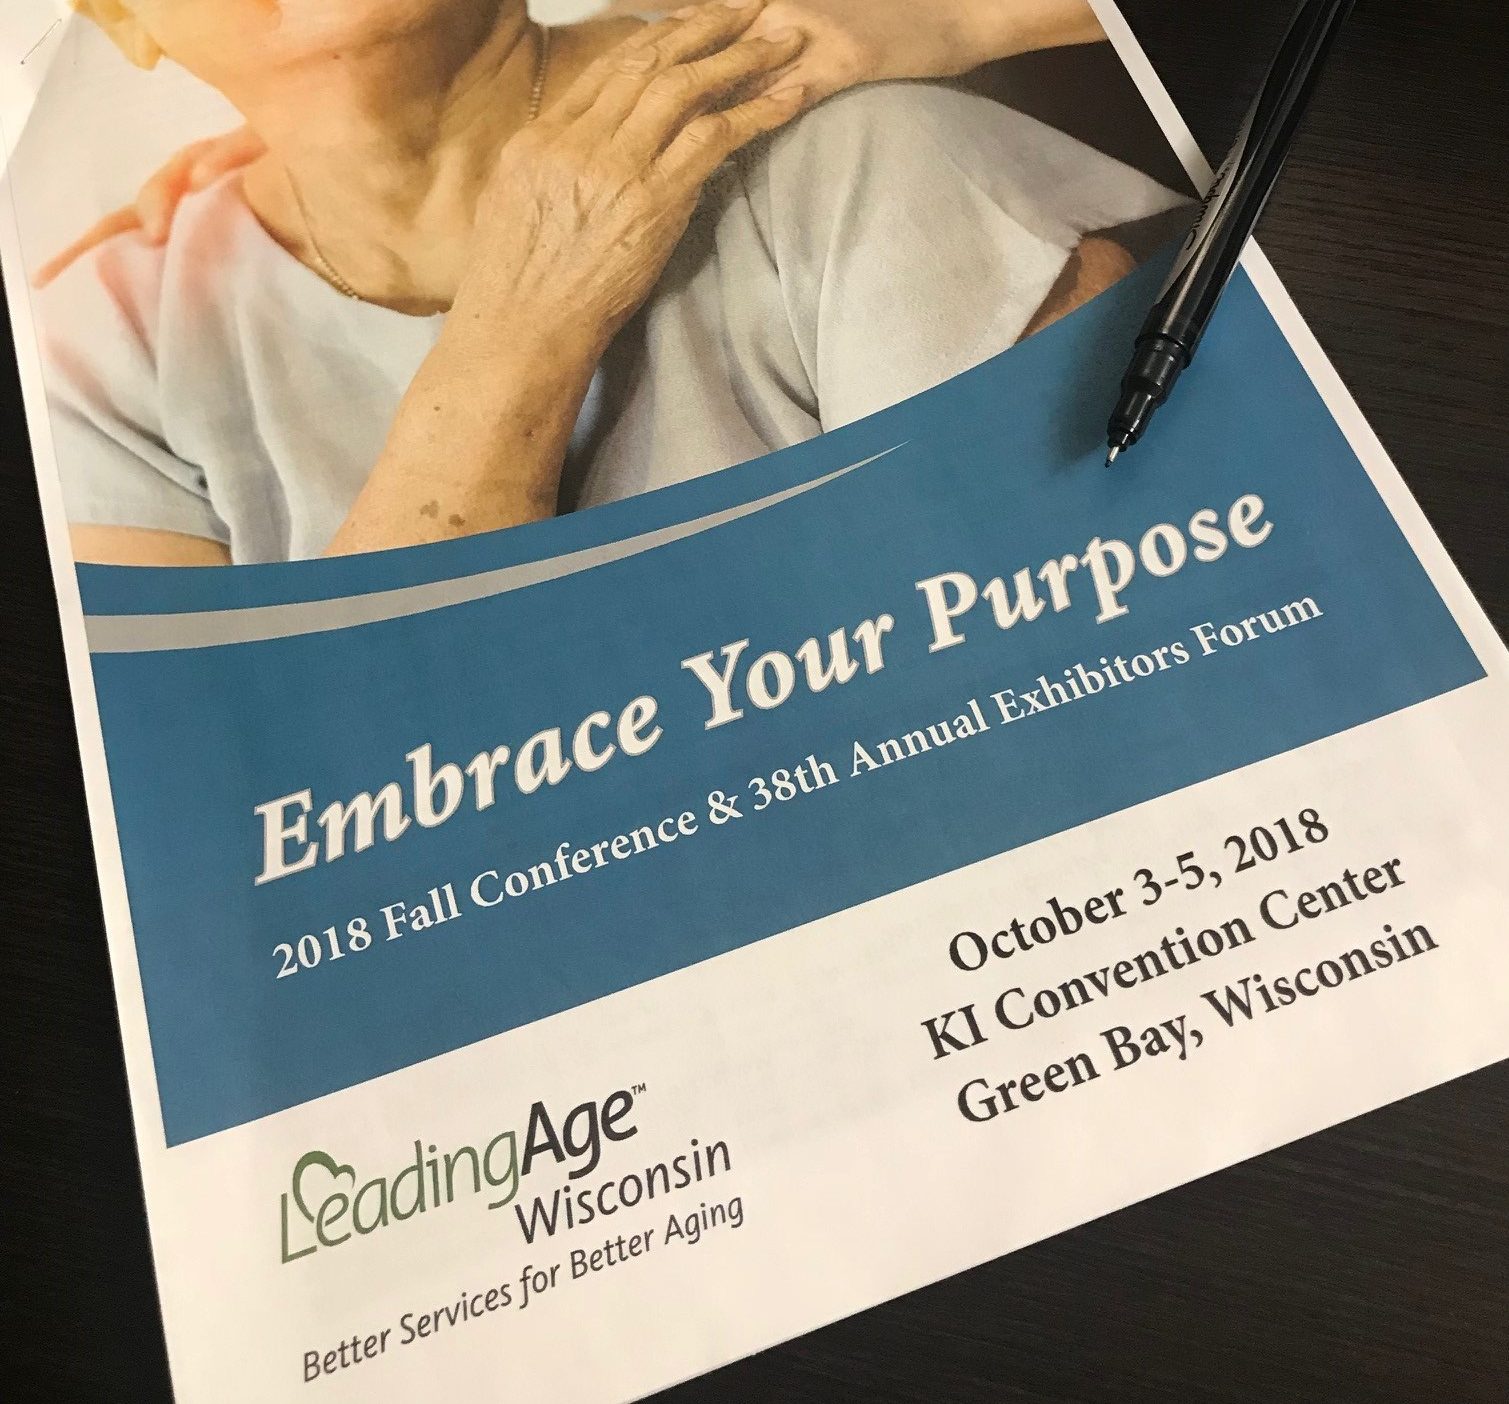 Leading Age Conference - Fall 2018 | Green Bay, Wis.